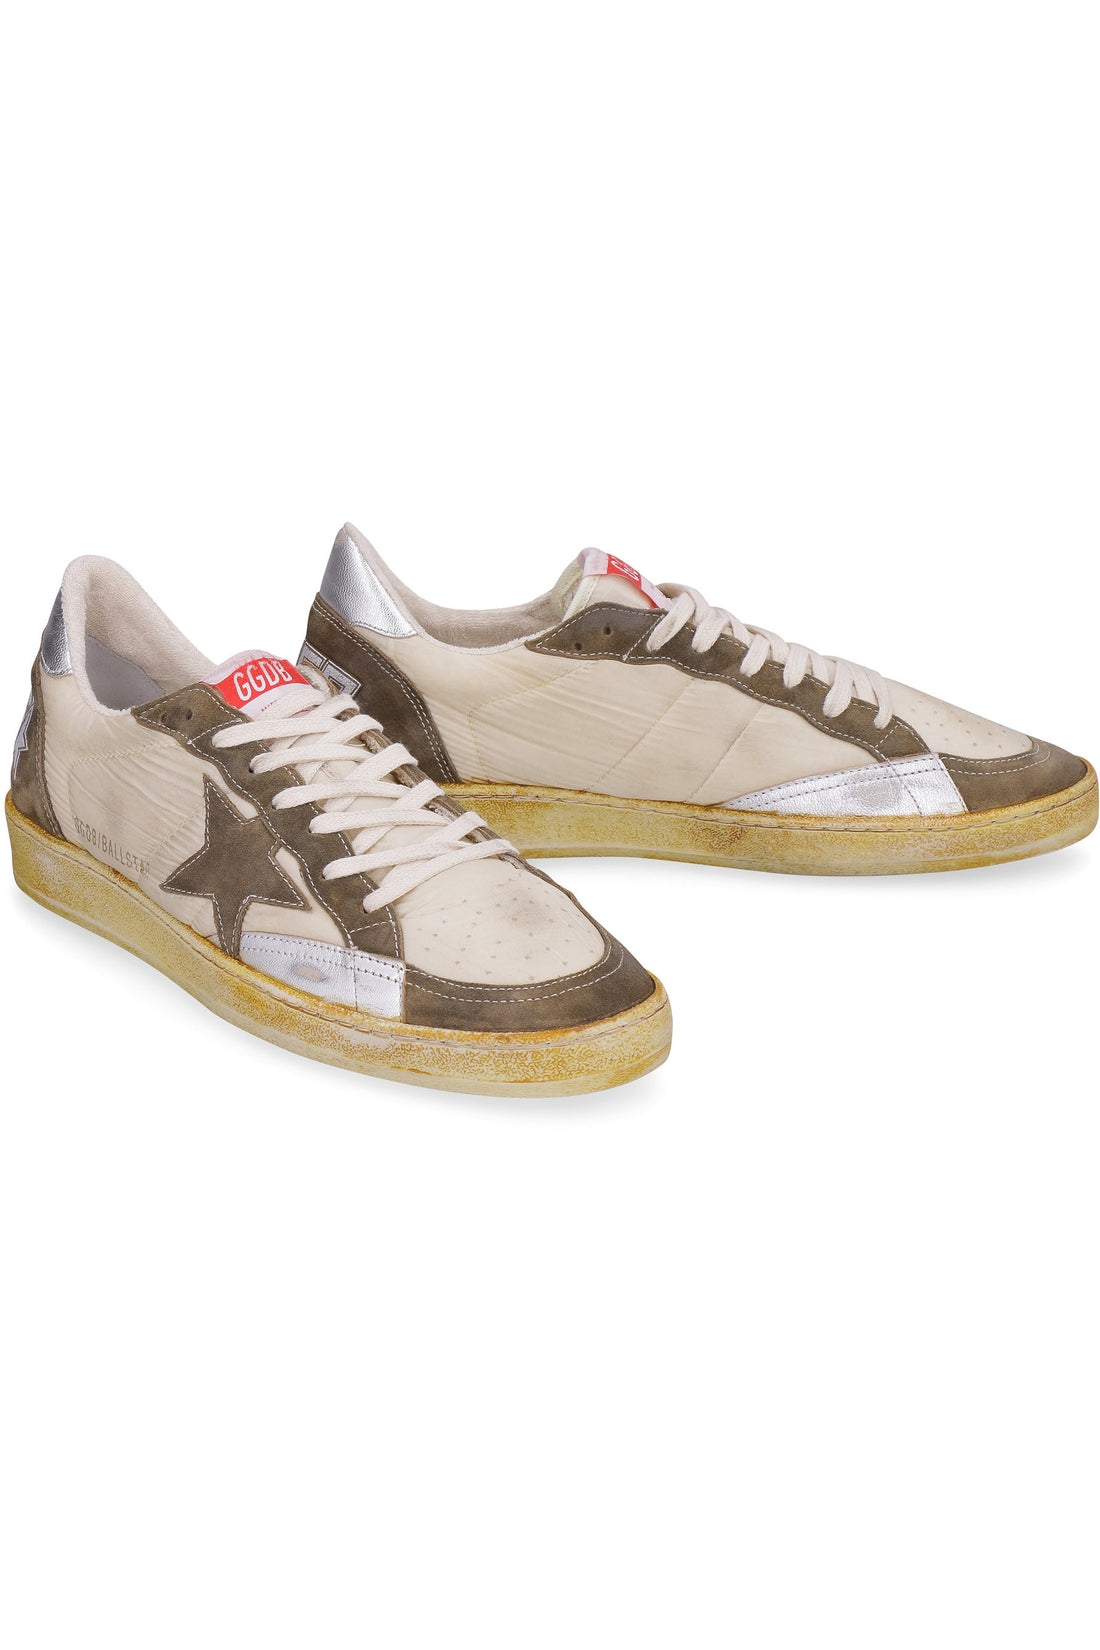 Golden Goose-OUTLET-SALE-Ball Star low-top sneakers-ARCHIVIST